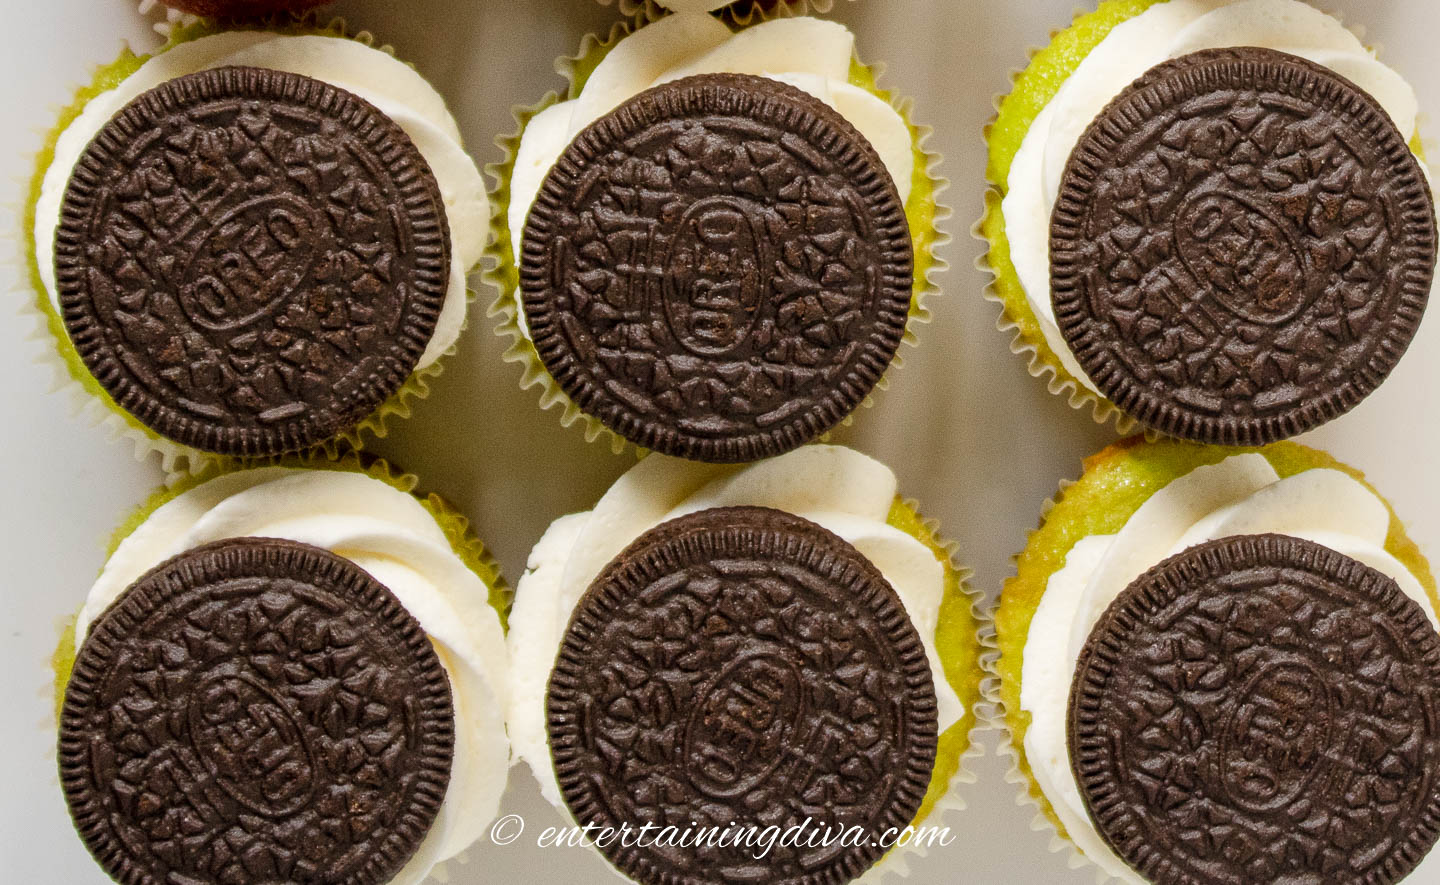 Oreo cookies on cupcakes with frosting